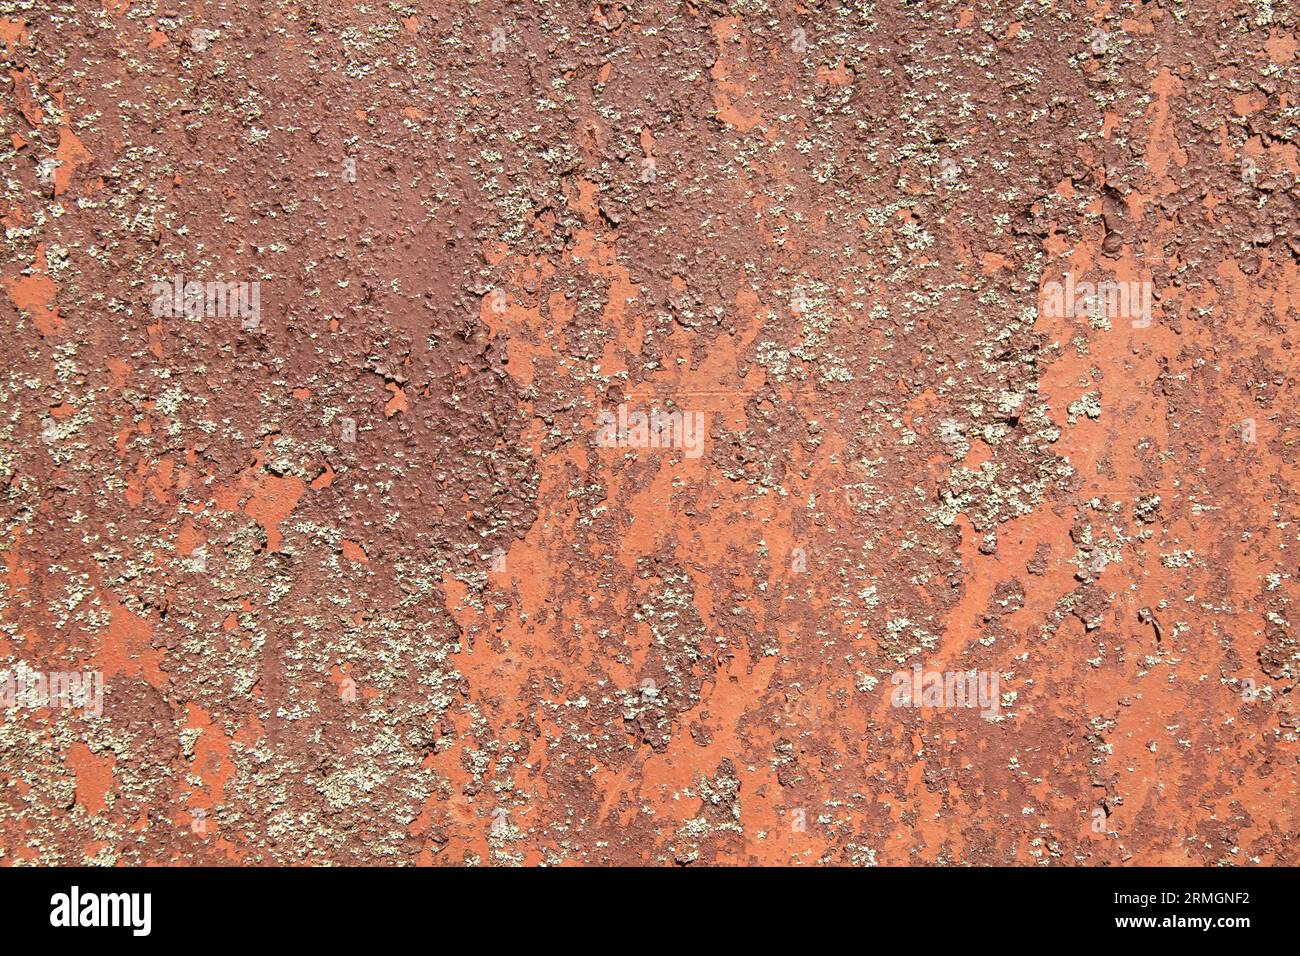 Rusted metallic background, texture. An old red and rusty surface with faded uneven color. Abstract rust pattern on light-brown metal surface Stock Photo